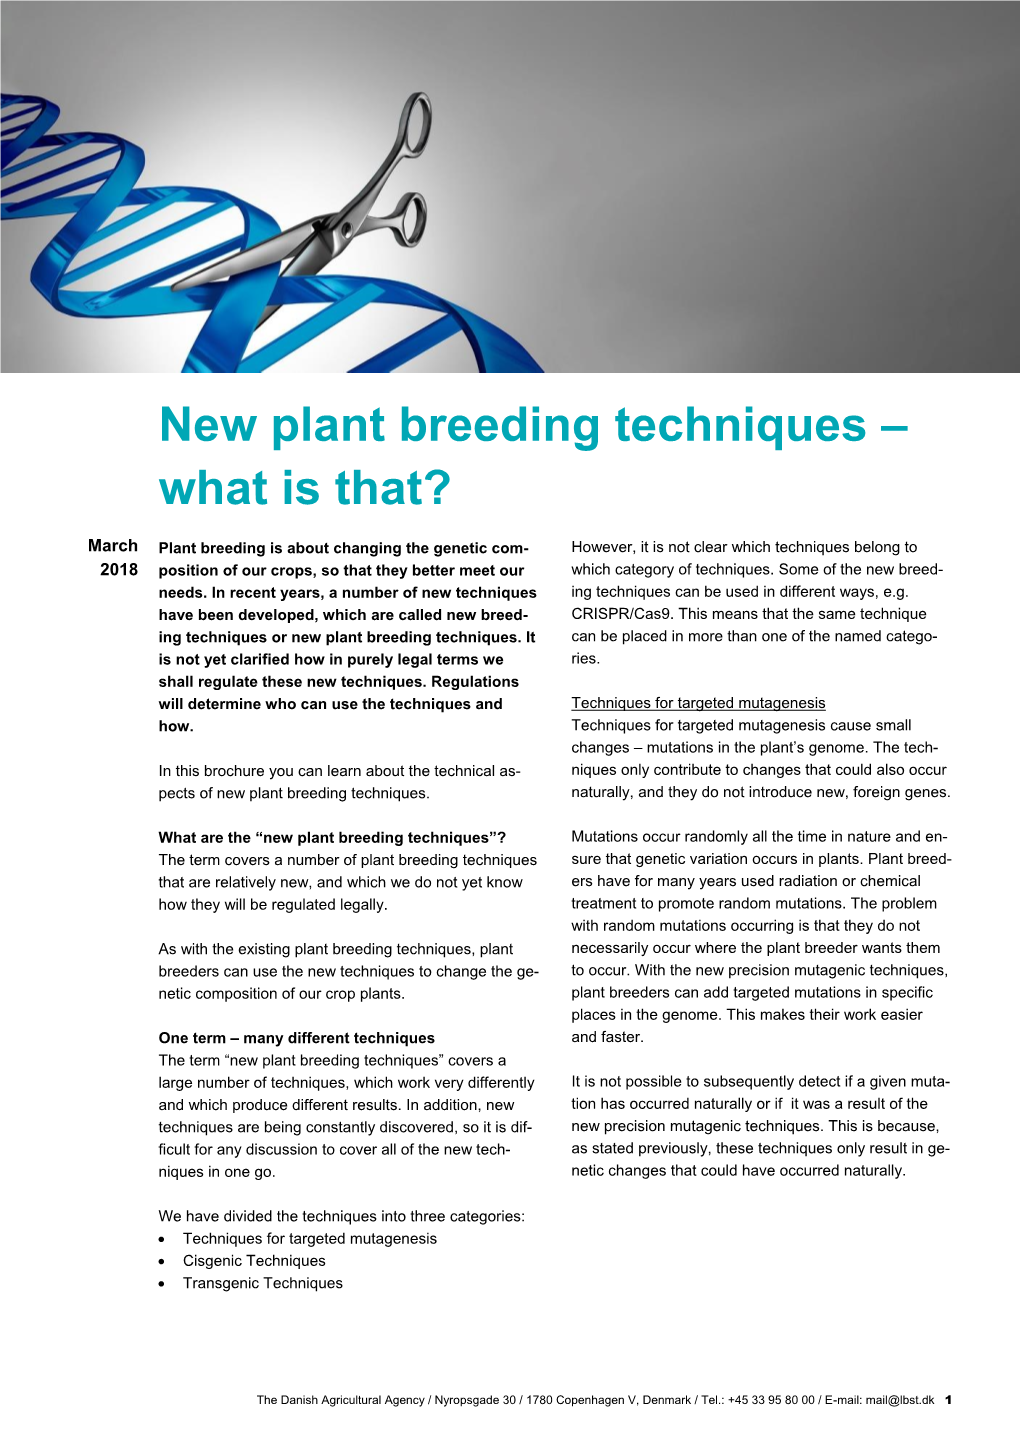 New Plant Breeding Techniques – What Is That?